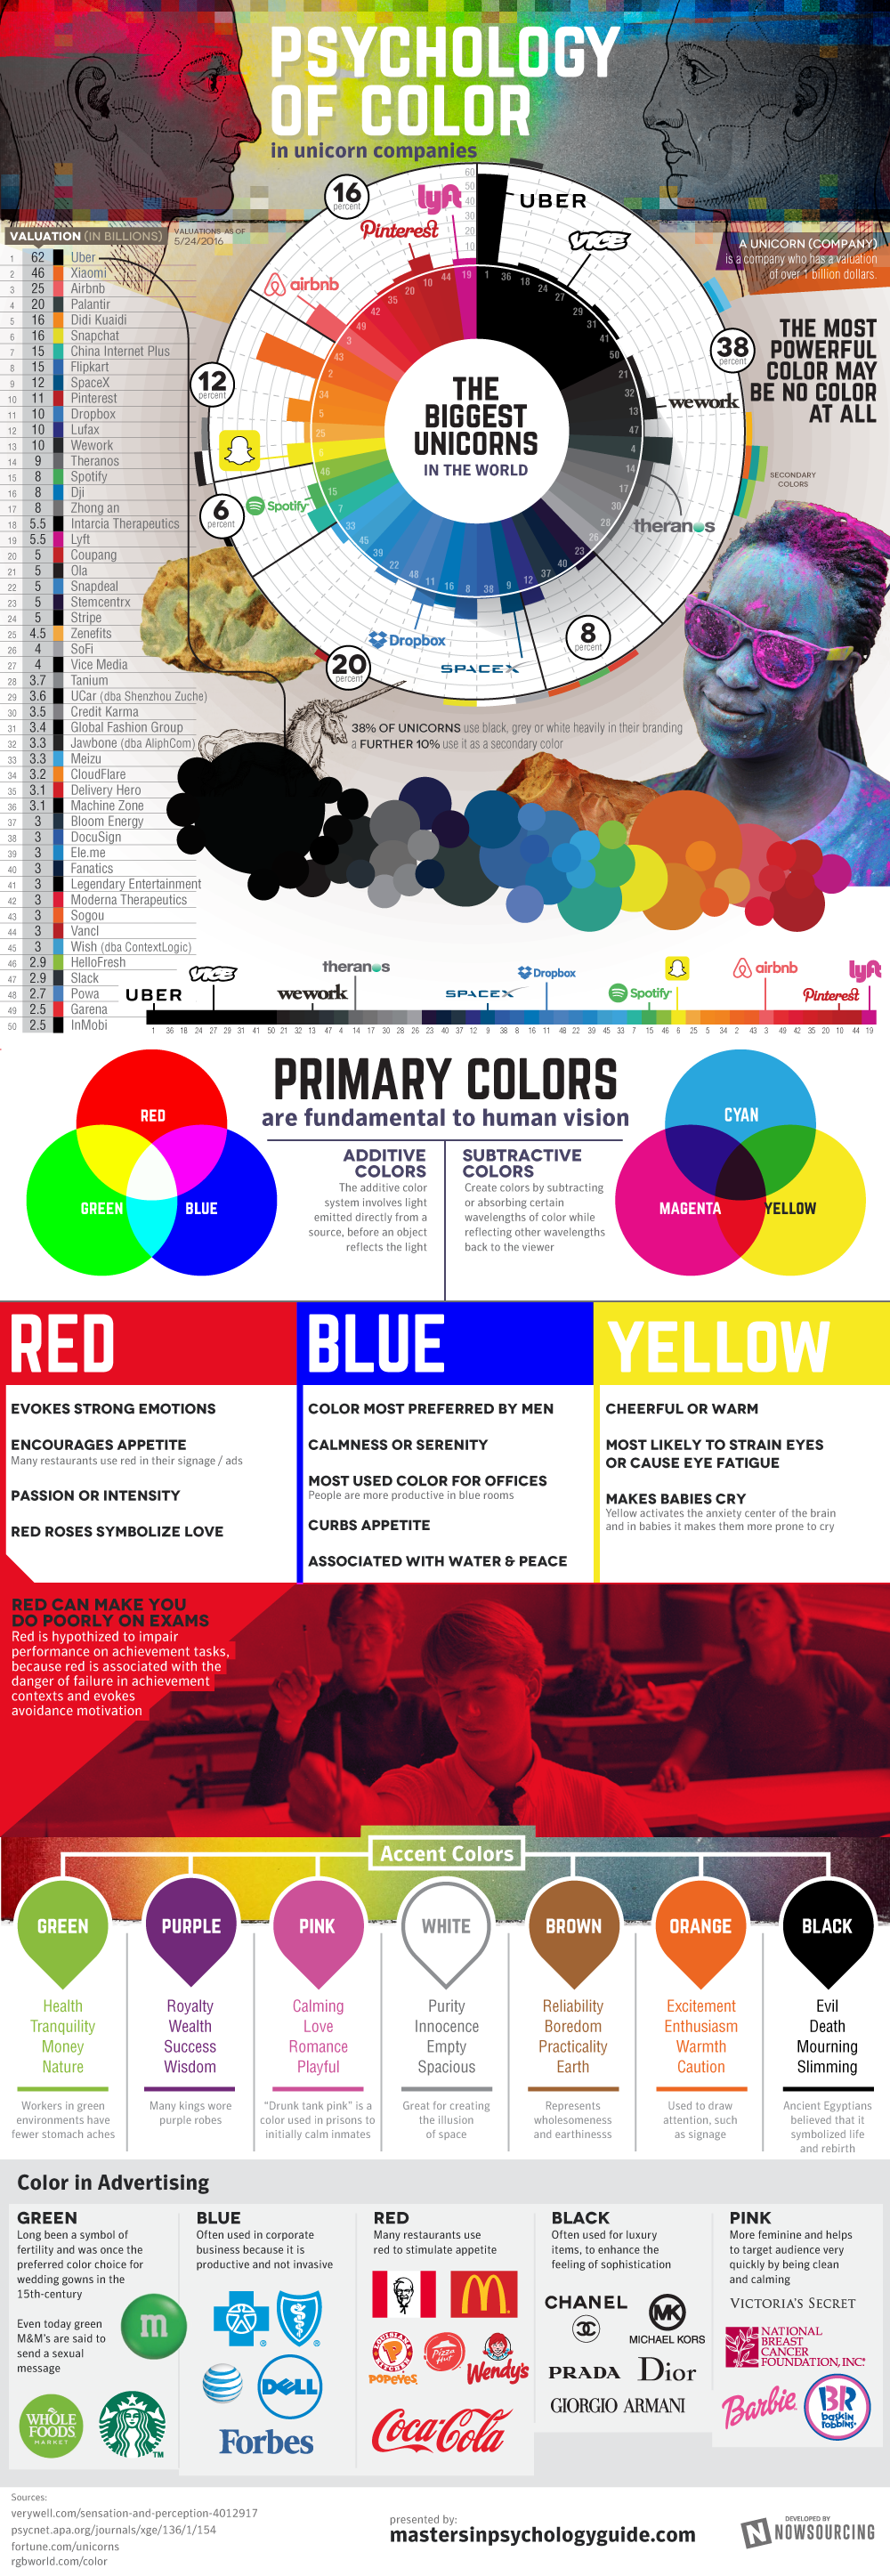 The Psychology of Color in Business